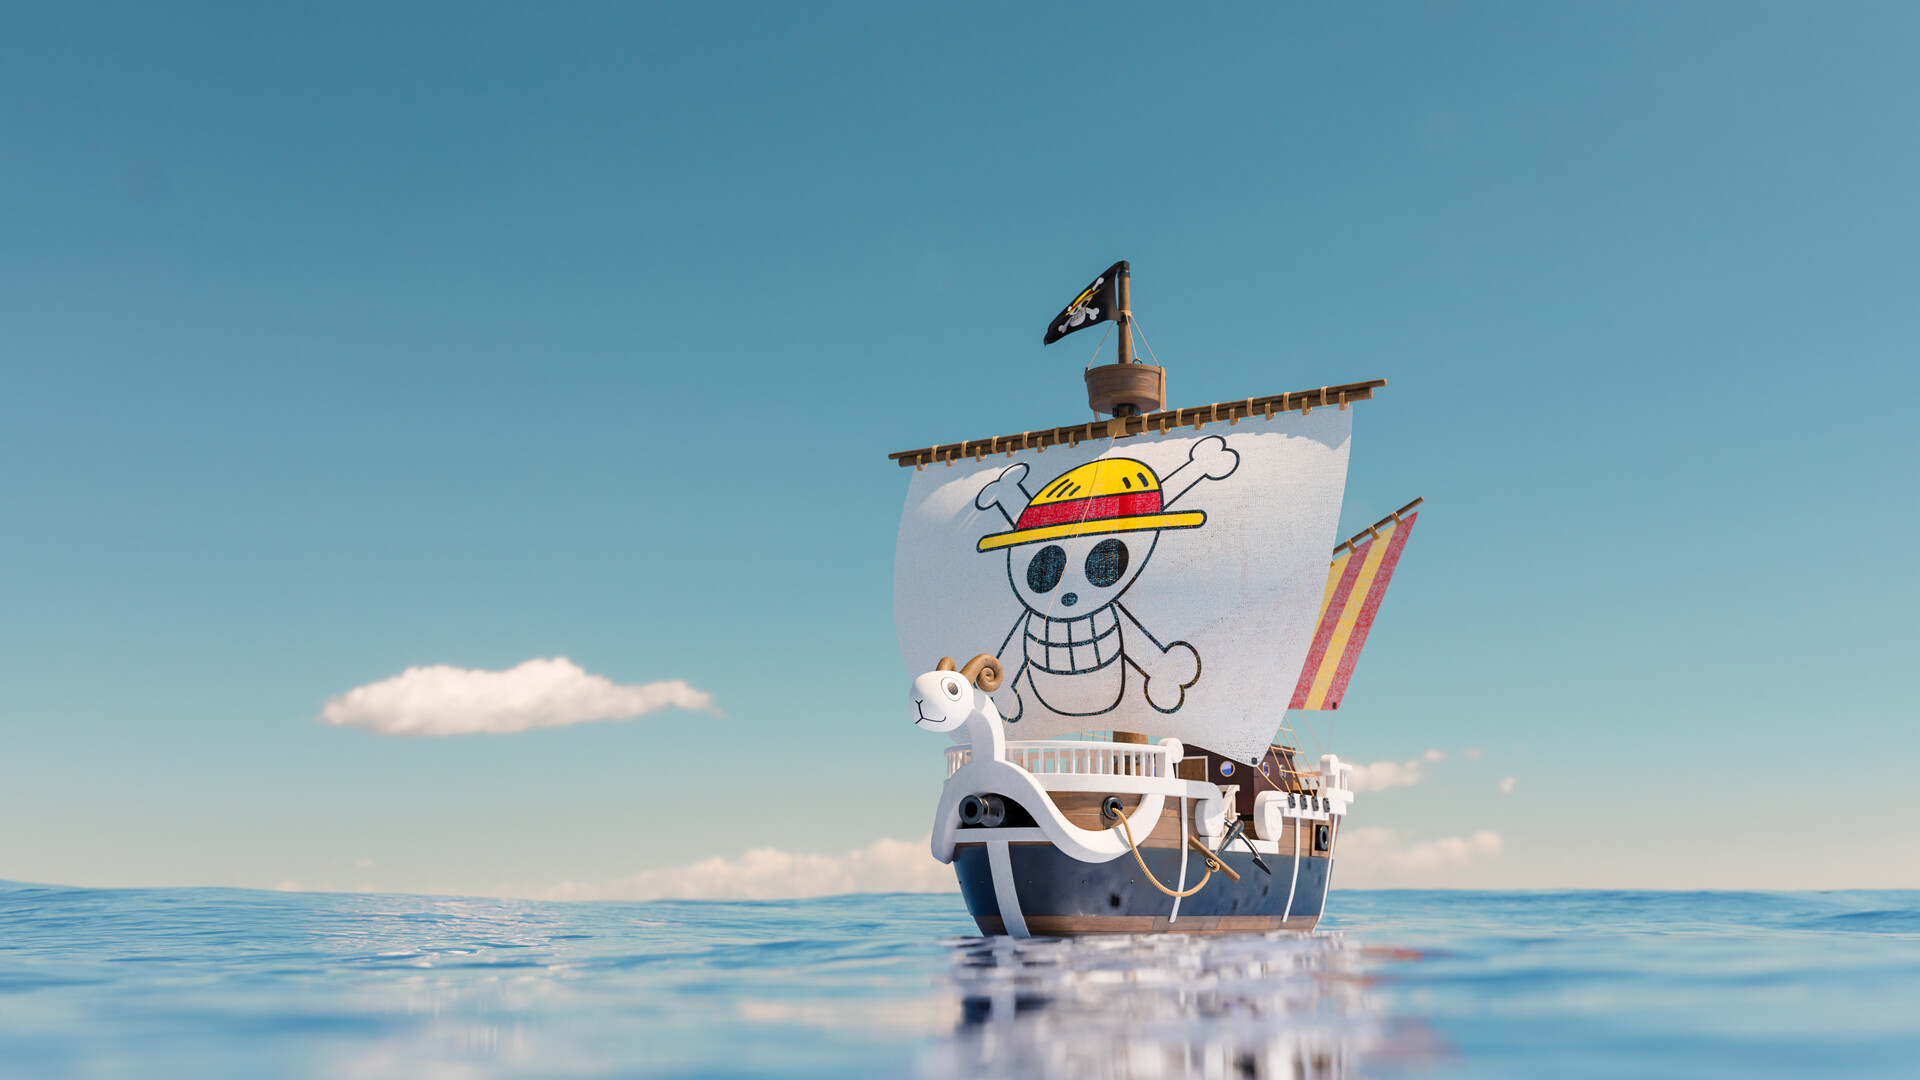 ArtStation - The Thousand Sunny - One Piece Animated Wallpaper